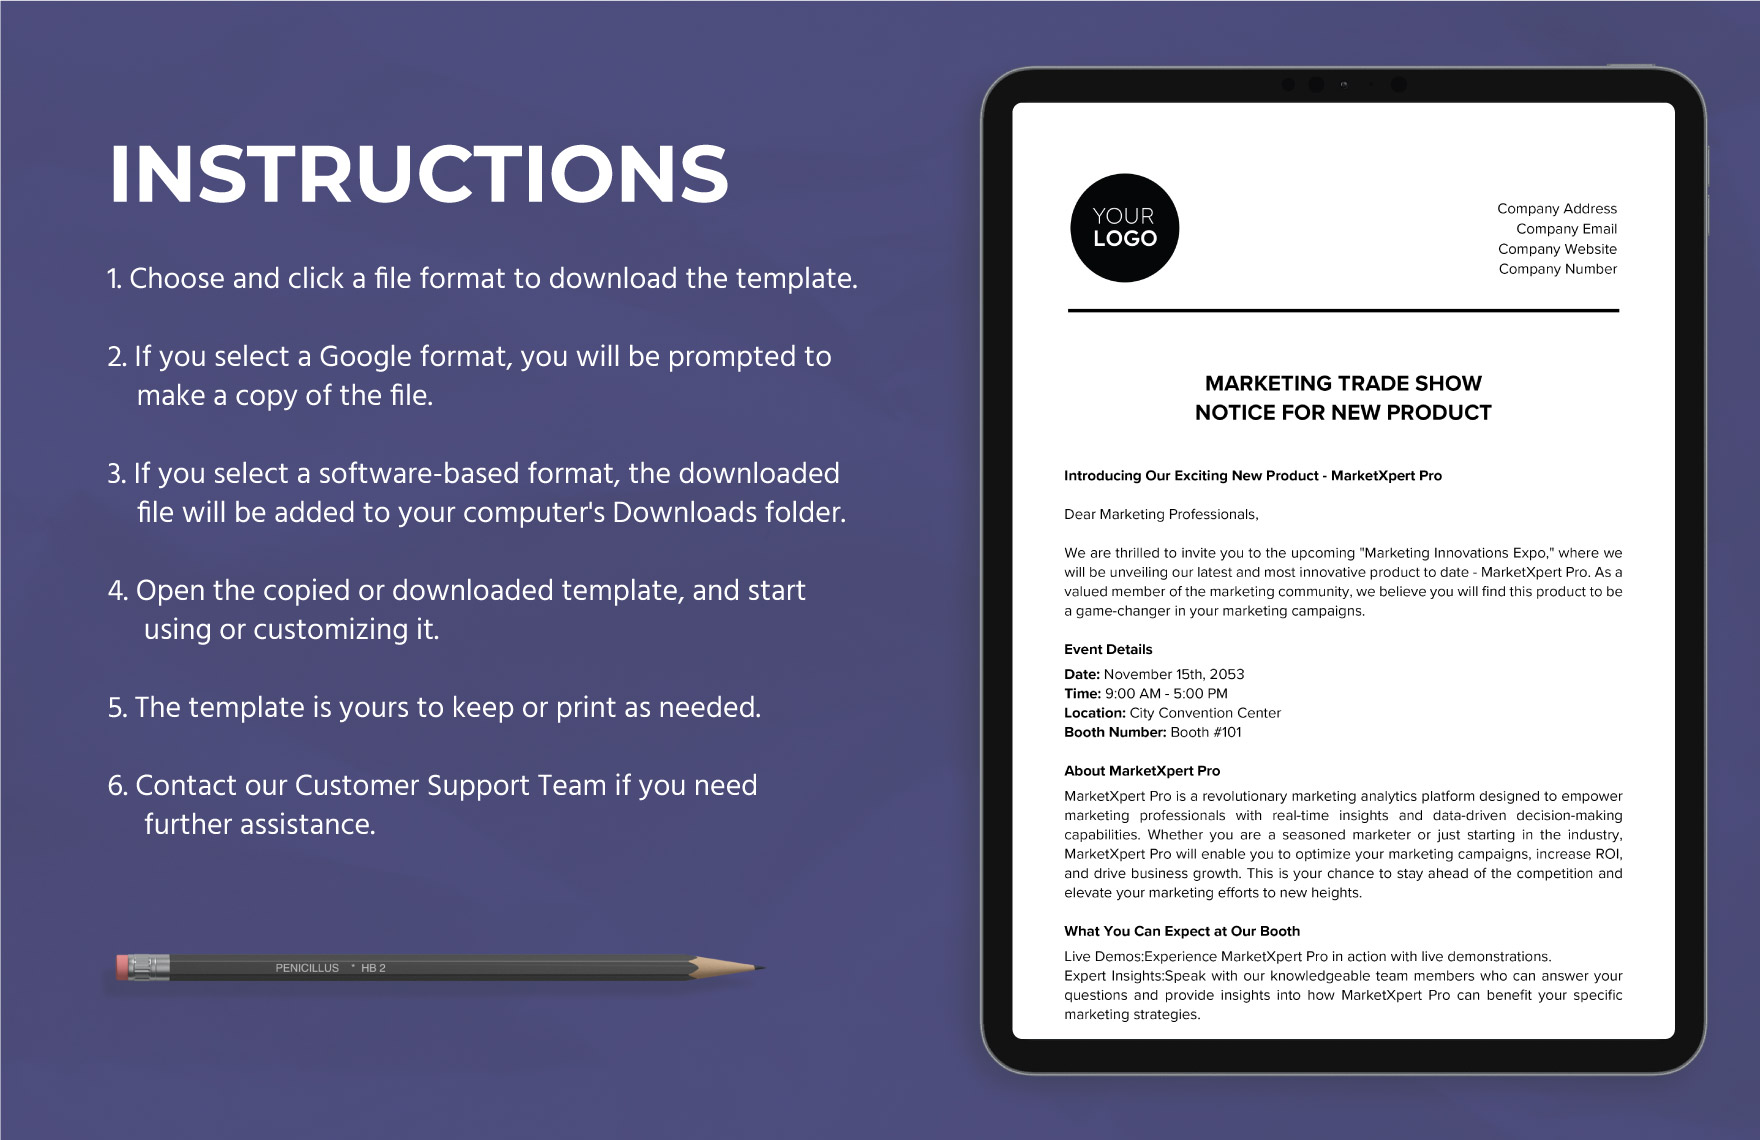 Marketing Trade Show Notice for New Product Template